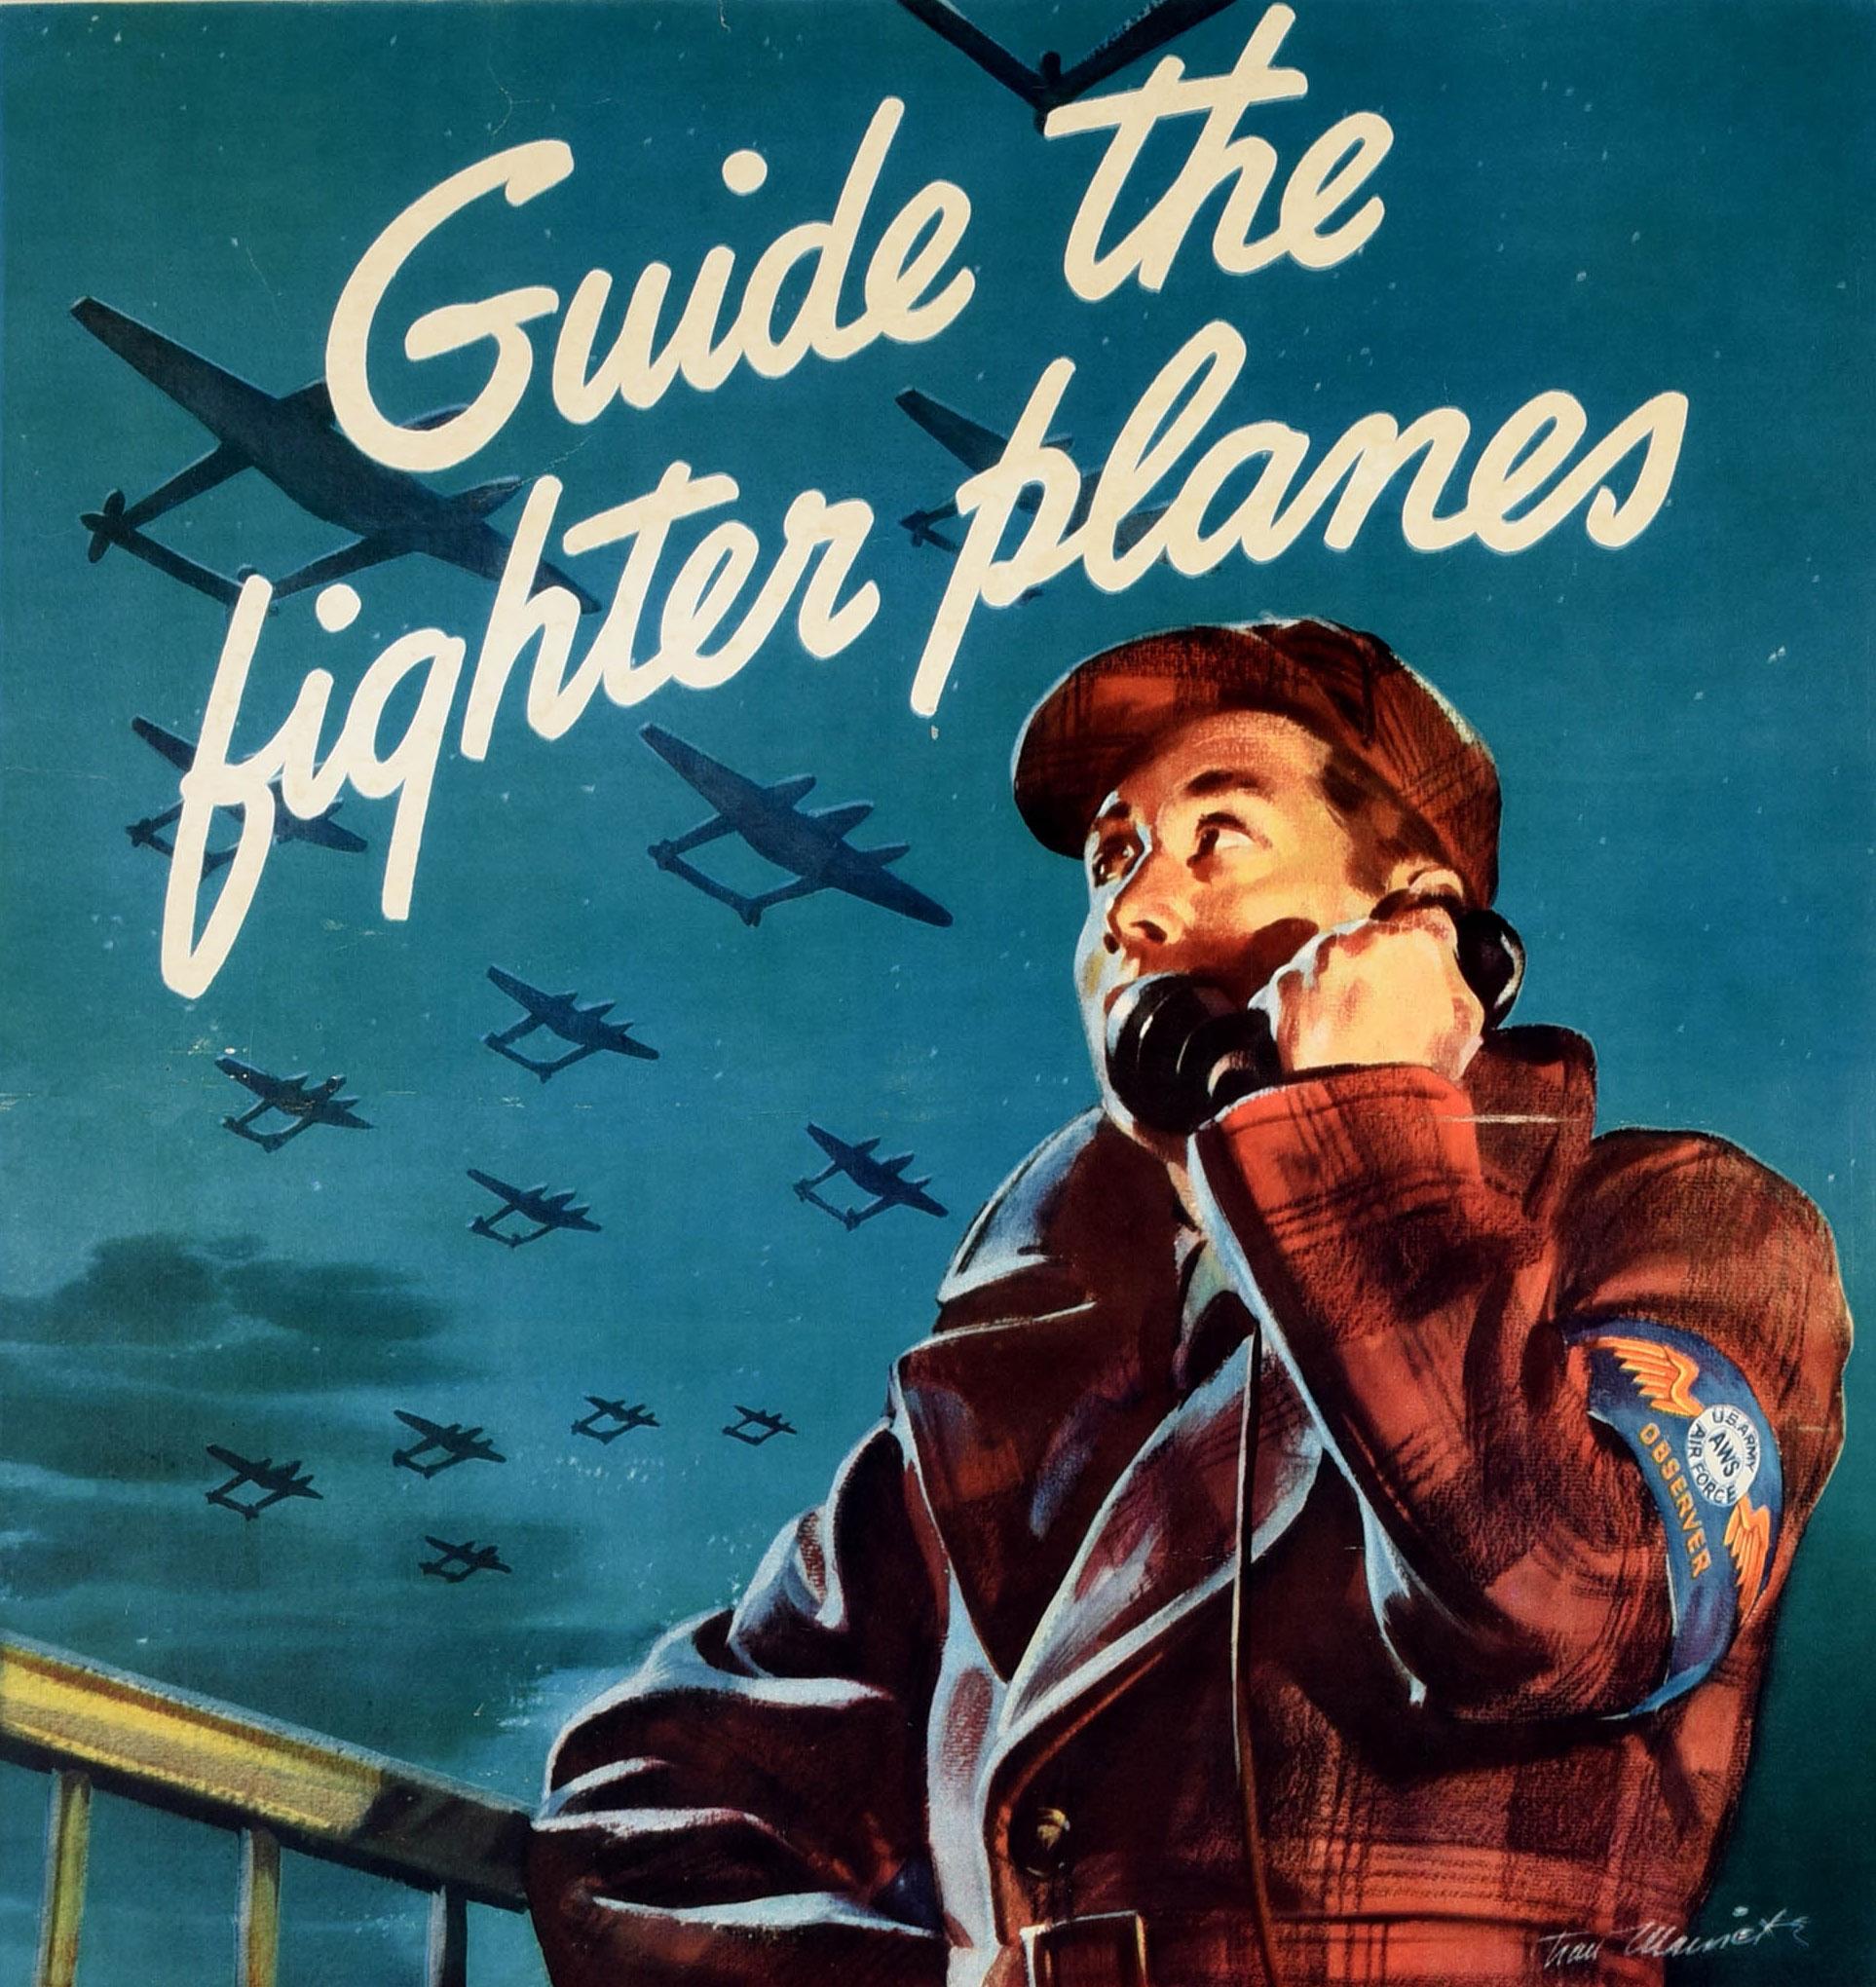 Original vintage world war two recruitment poster - Guide the fighter planes Join the Army Air Forces Ground Observer Corps Volunteer at your local Civilian Defense Office! Great design depicting a man wearing an Observer armband over his coat